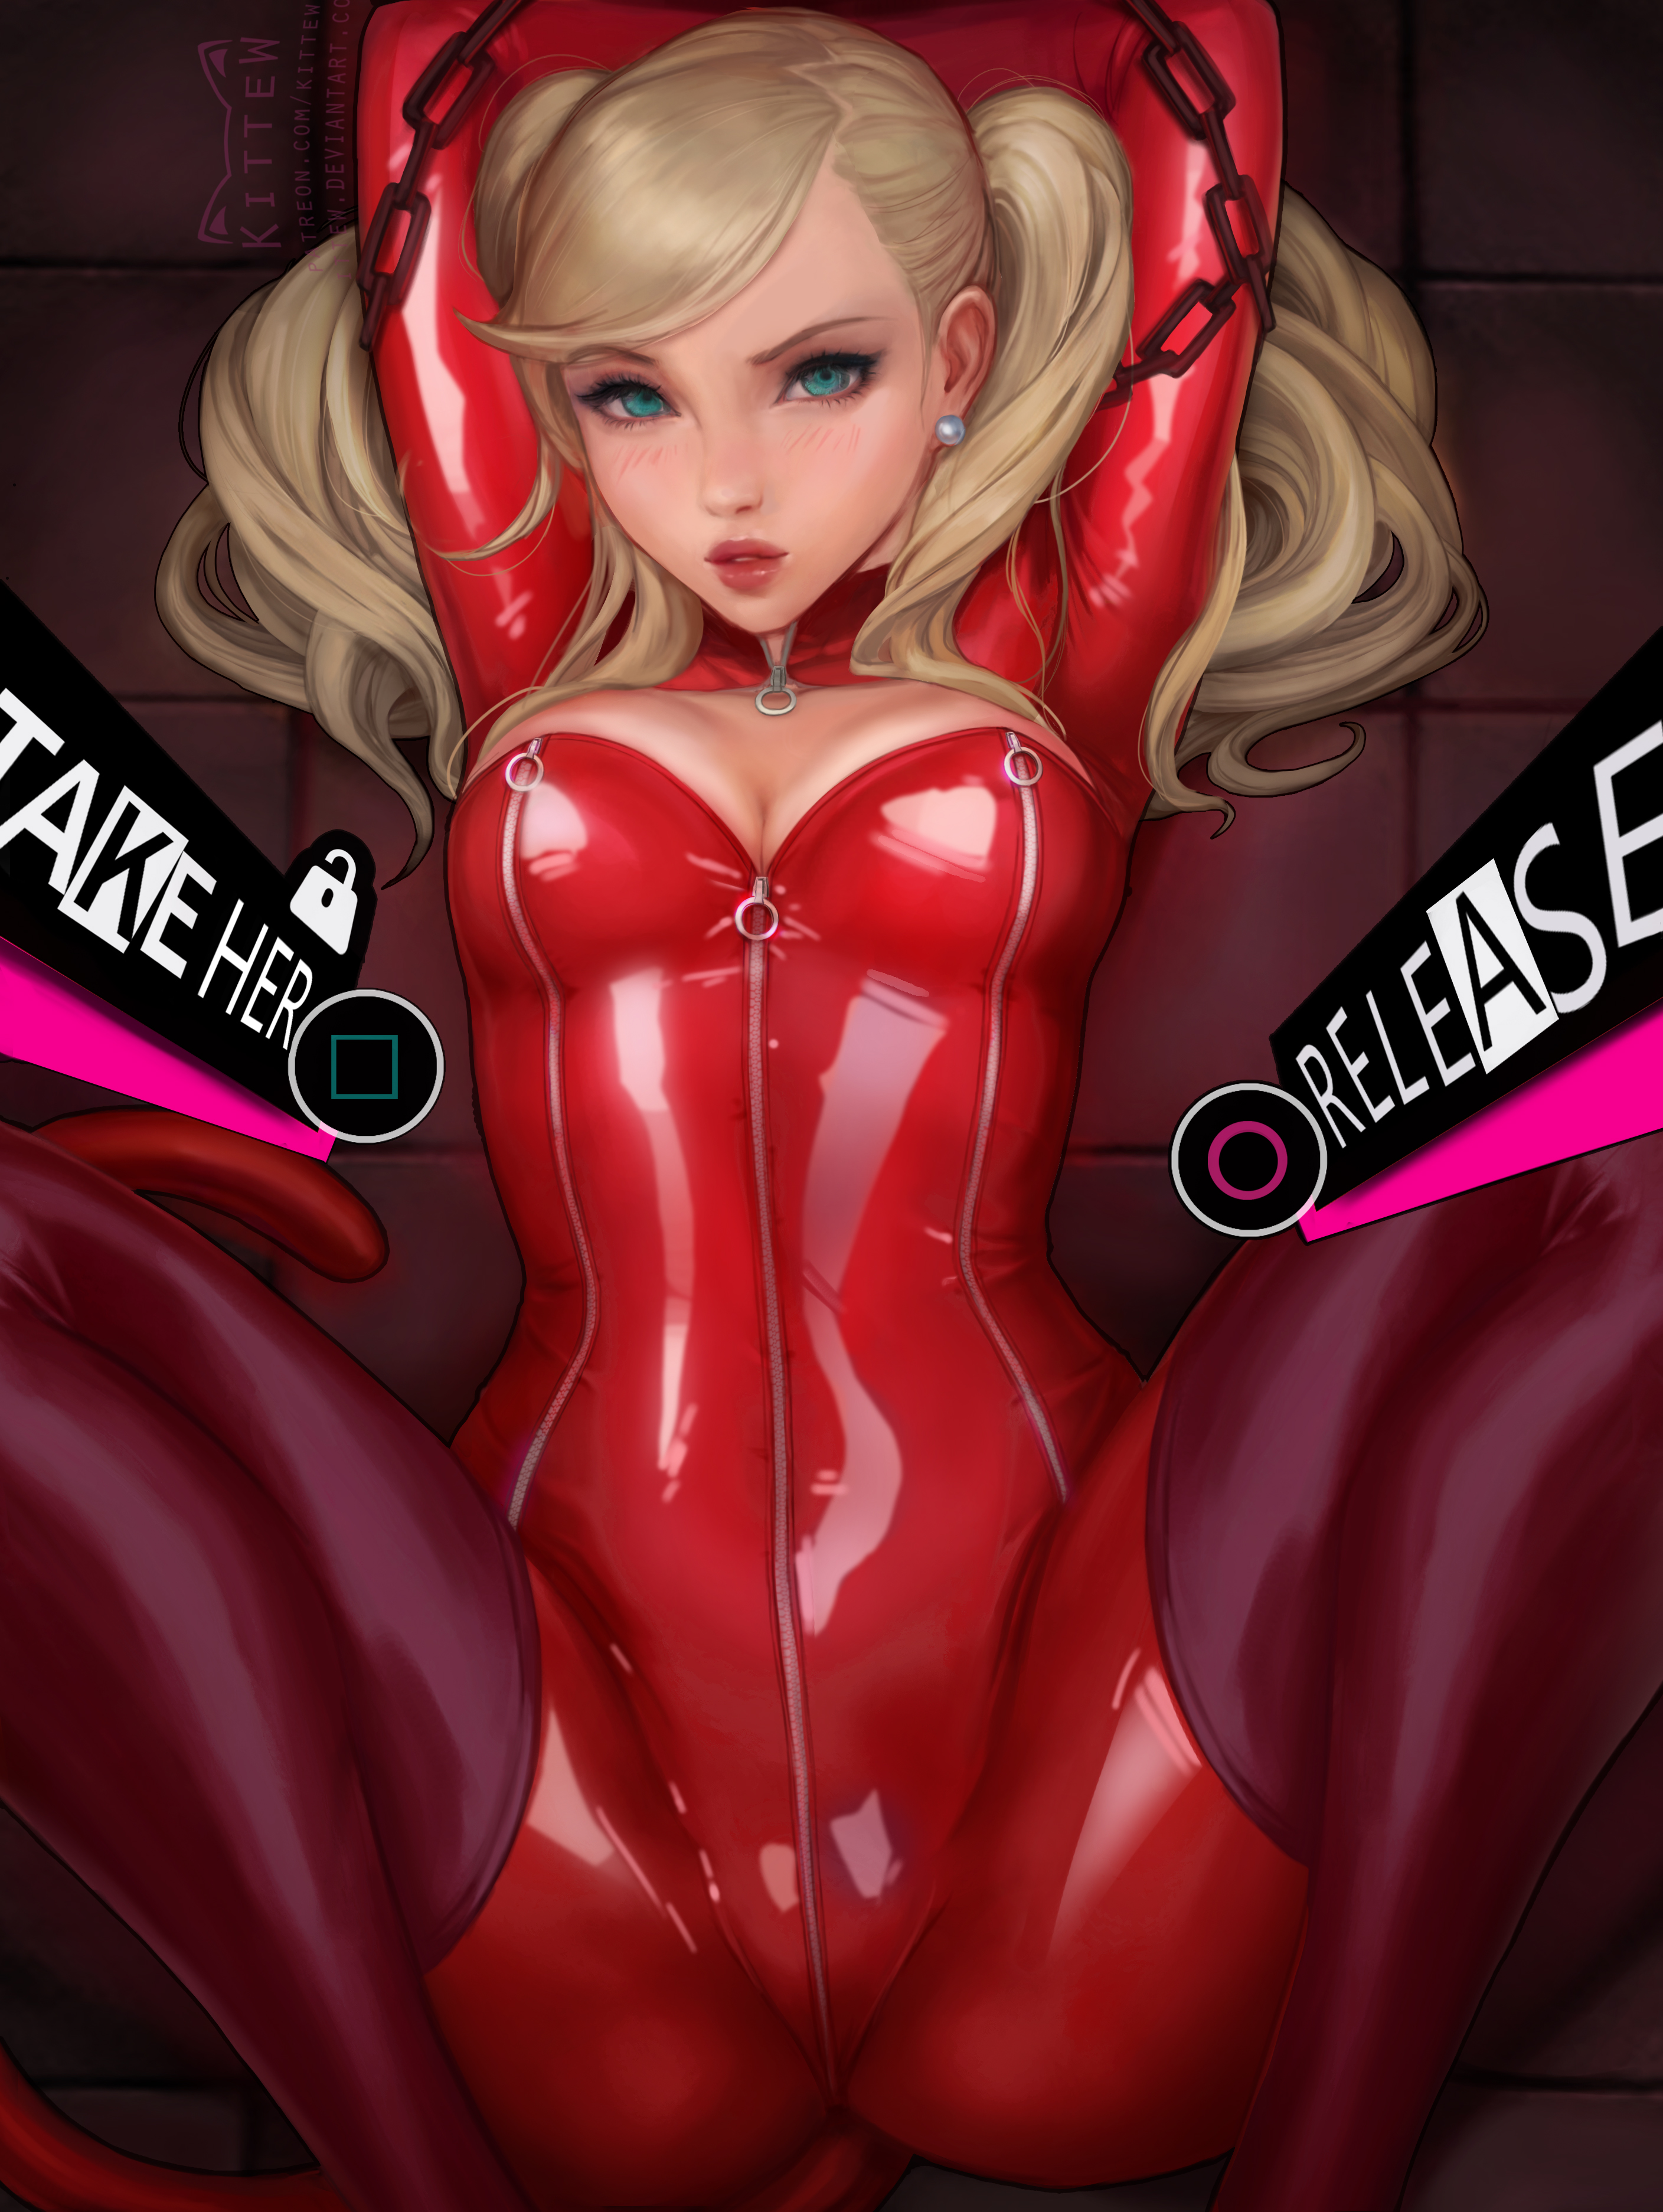 Anime 2817x3747 Ann Takamaki  Persona series Persona 5 blonde twintails blue eyes portrait display blushing anime anime girls parted lips chains bodysuit tight clothing thigh high boots thick thigh cleavage red clothing lying on back top view zipper artwork drawing digital art illustration 2D fan art Kittew POV implied sex